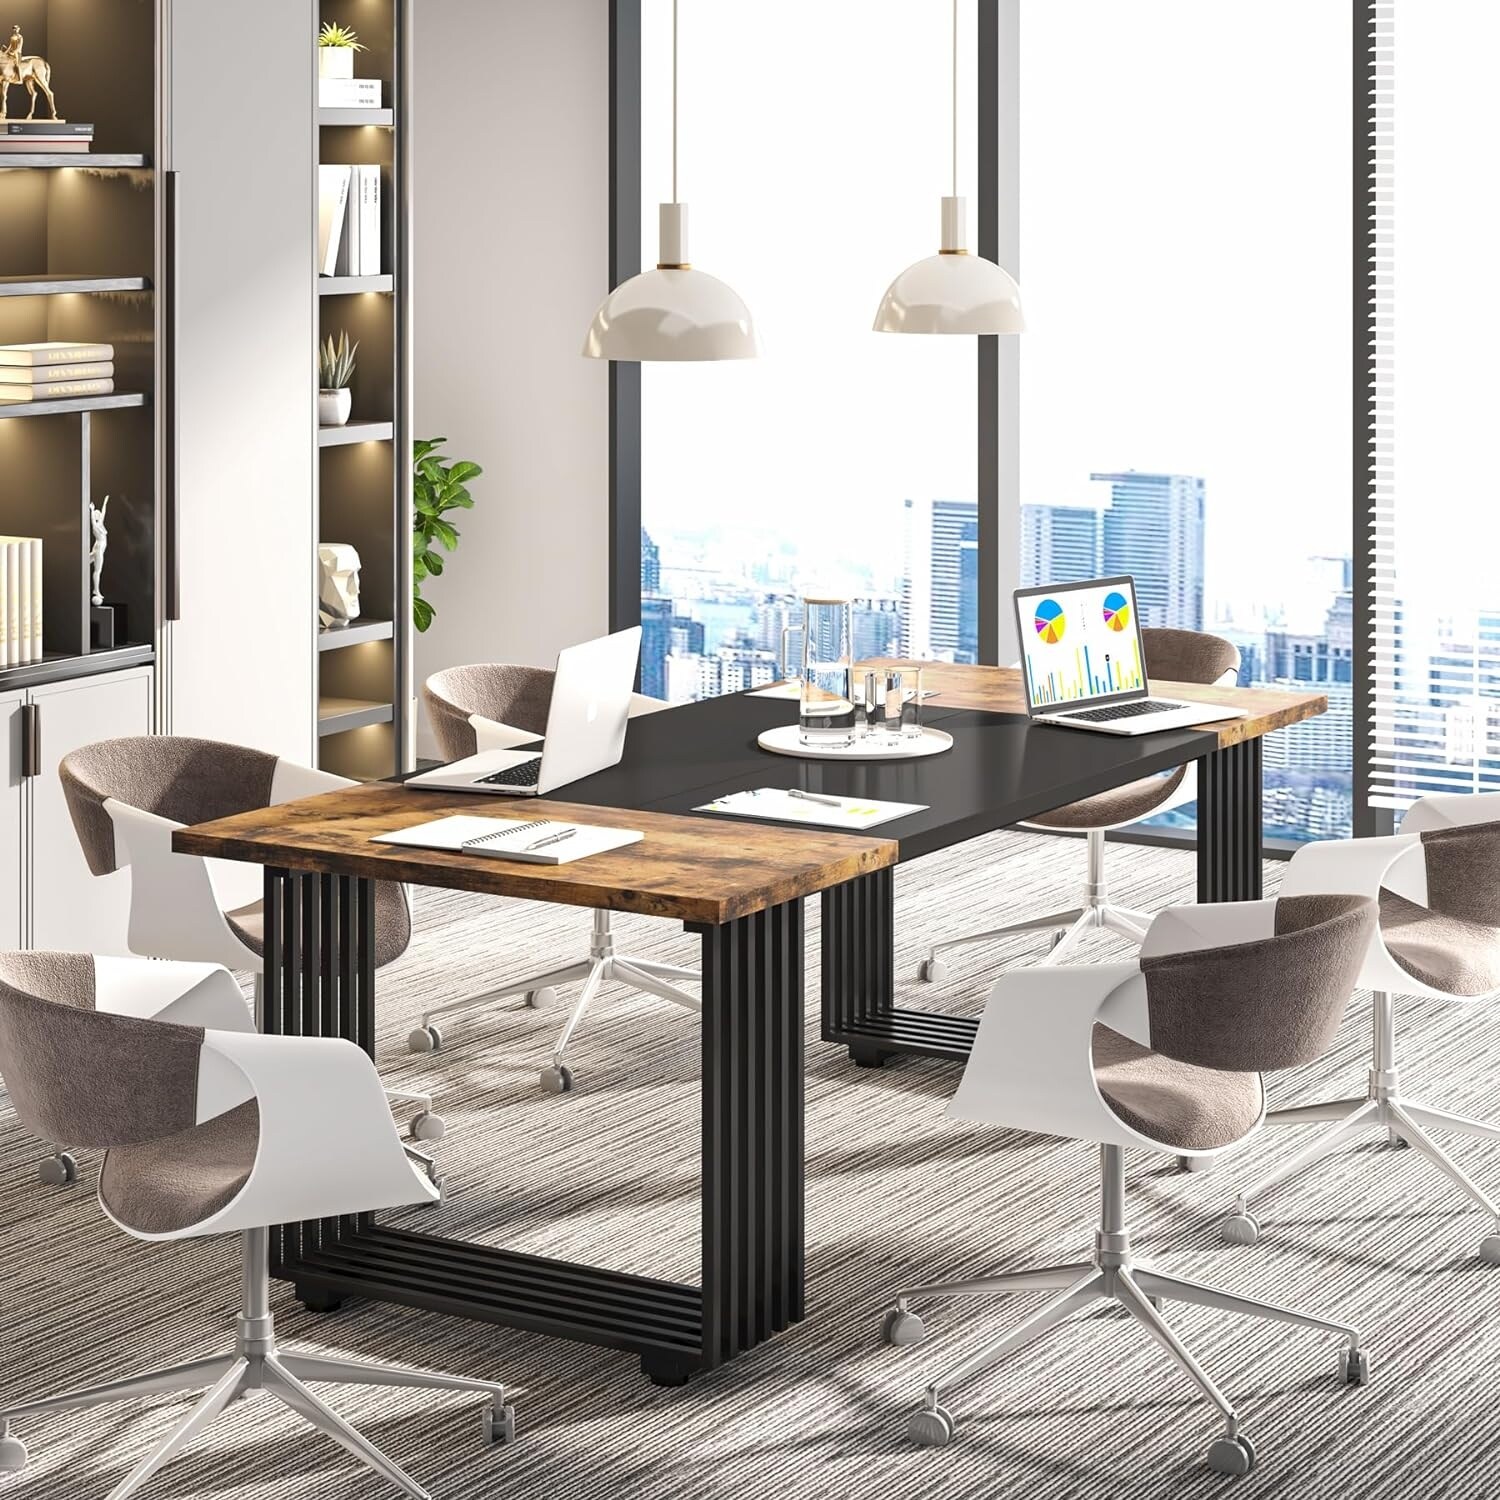 https://ak1.ostkcdn.com/images/products/is/images/direct/eaa720e7be3035d6995d49a01d1ec181d8aea179/70.9-Inch-Modern-Office-Desk-Executive-Desk-with-Gold-Metal-Frame.jpg